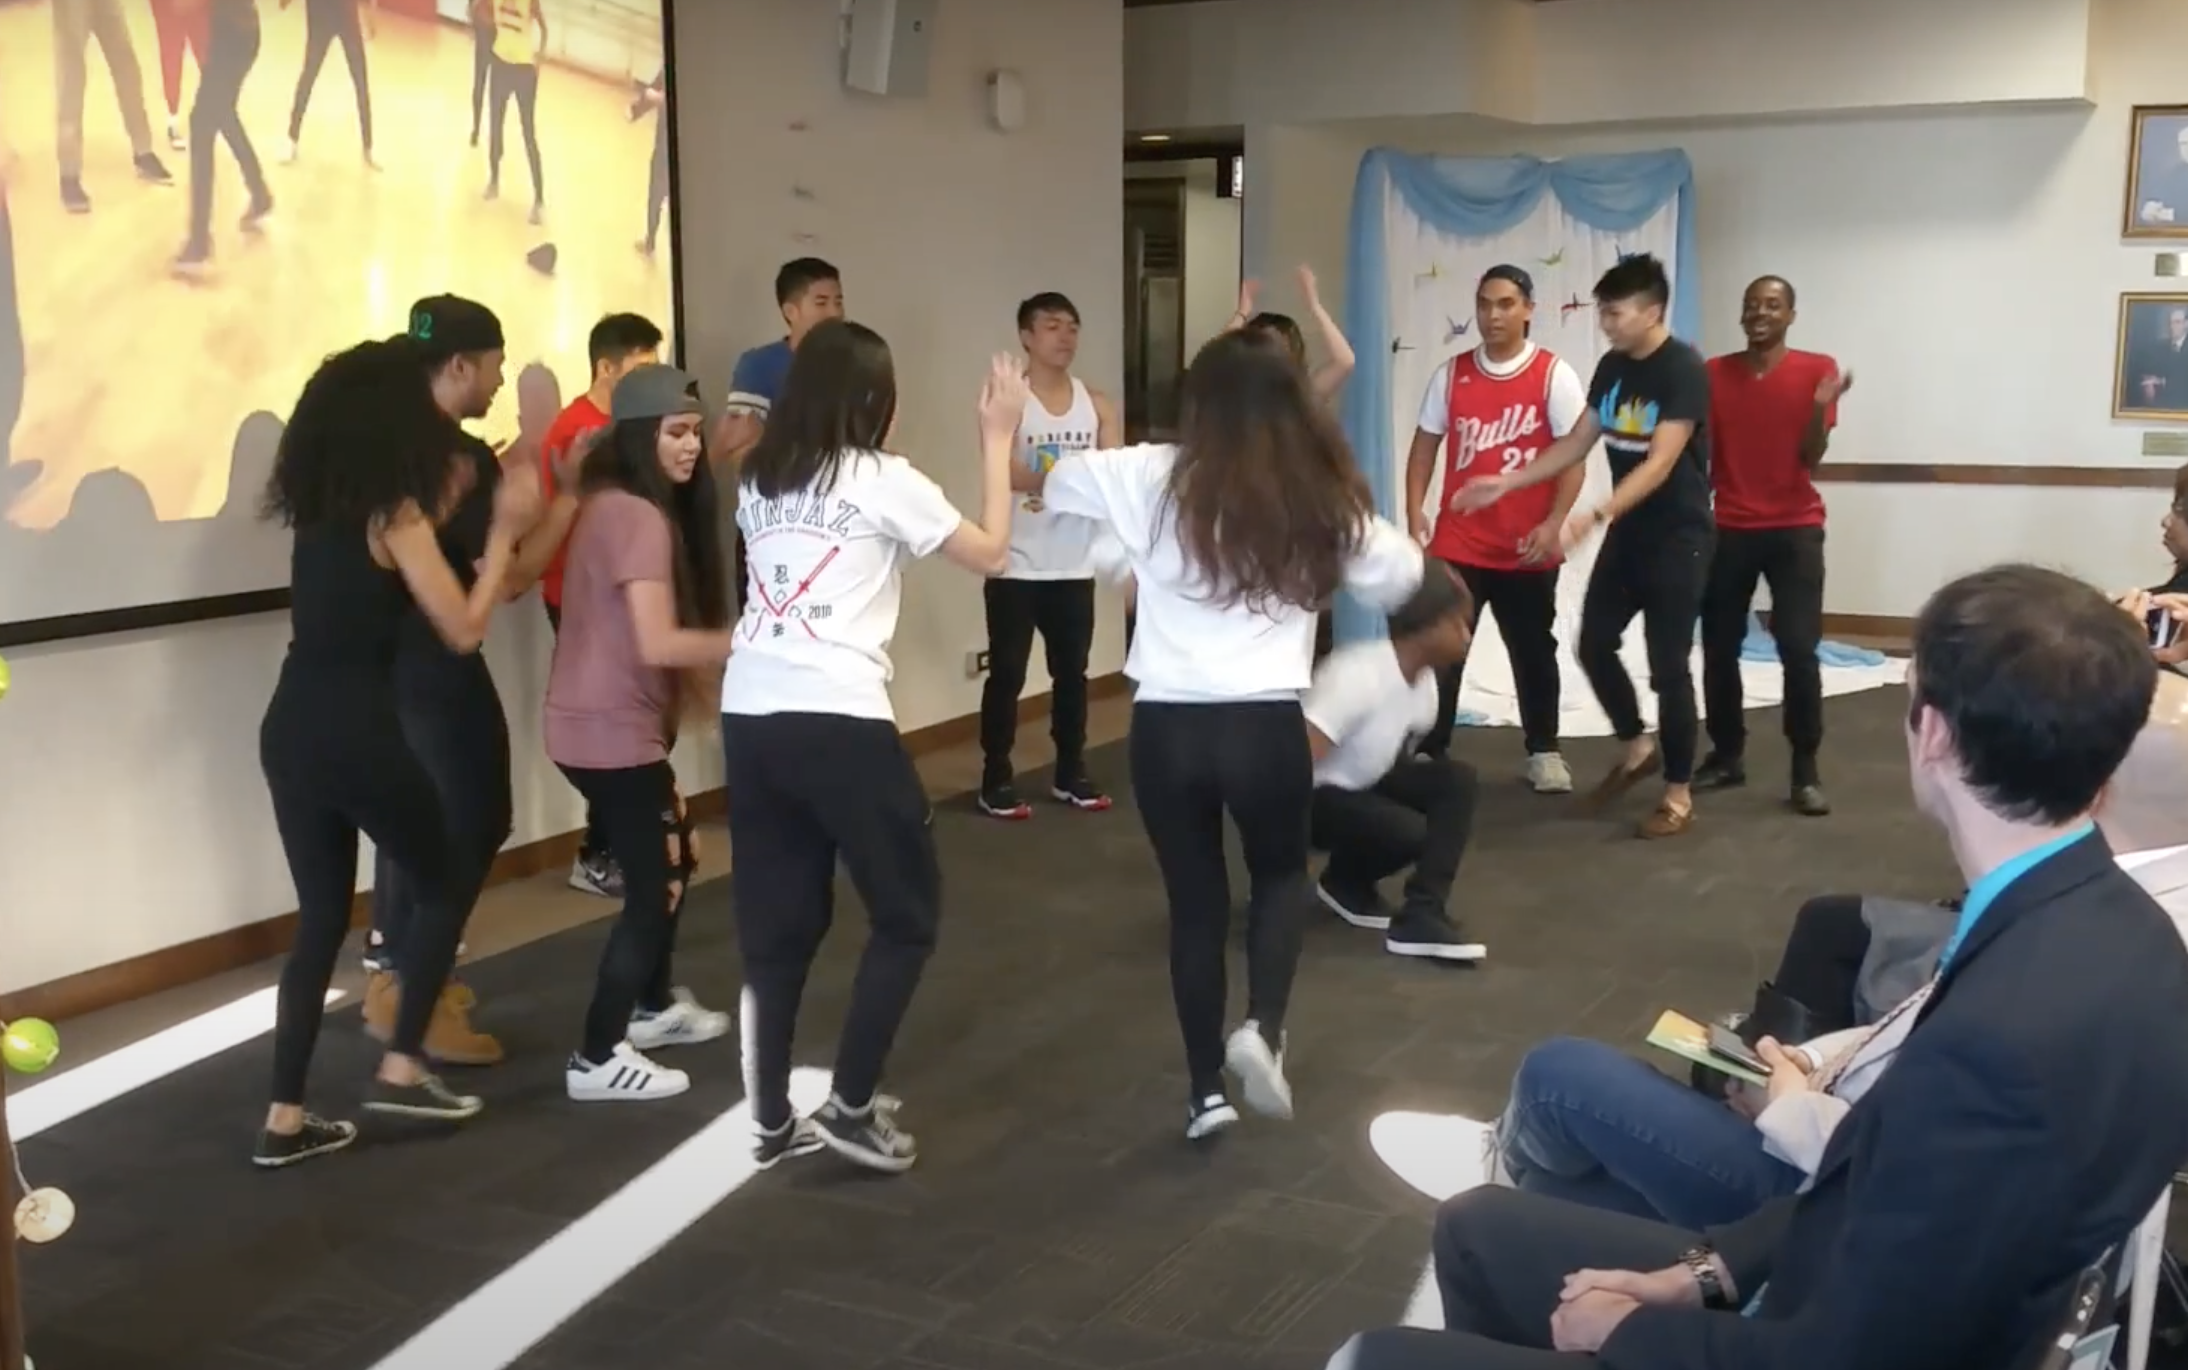 One circle of dancers of many races surrounds one mixed Black and Asian man dancing in the center